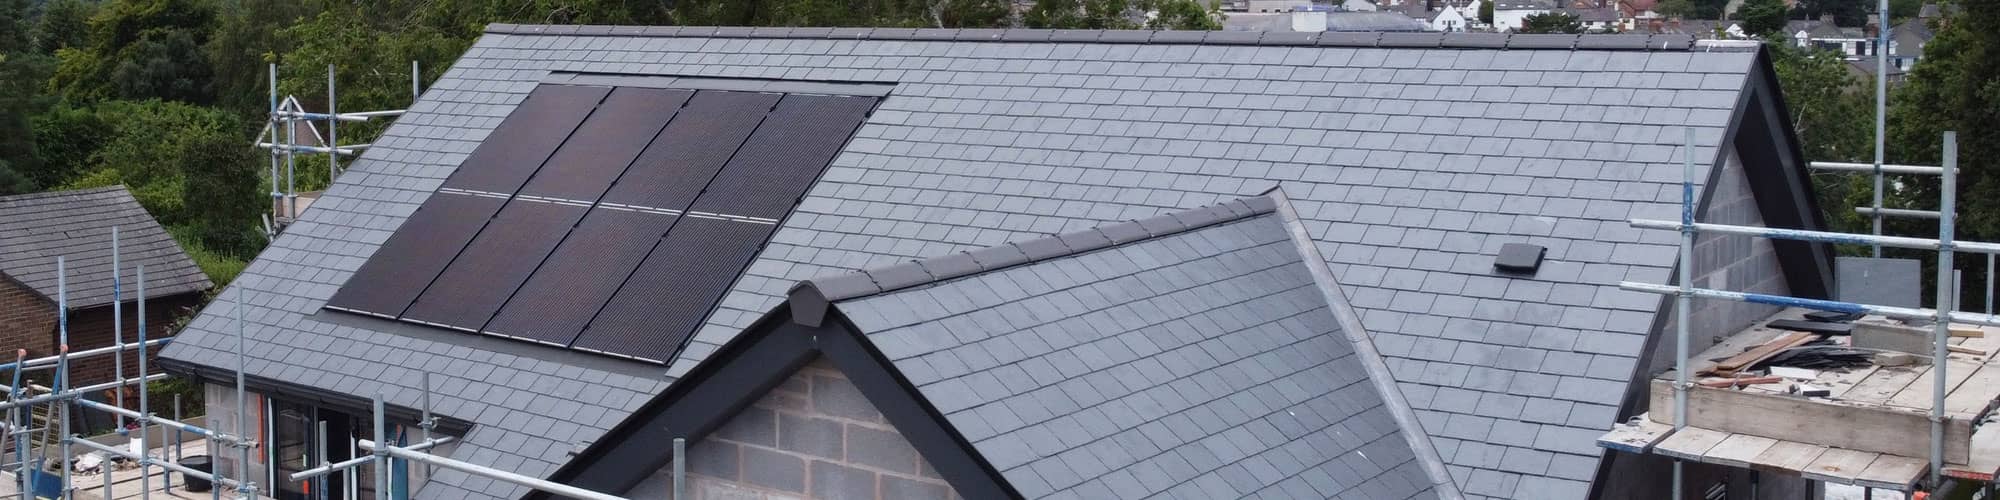 New slate roof on North Wales house